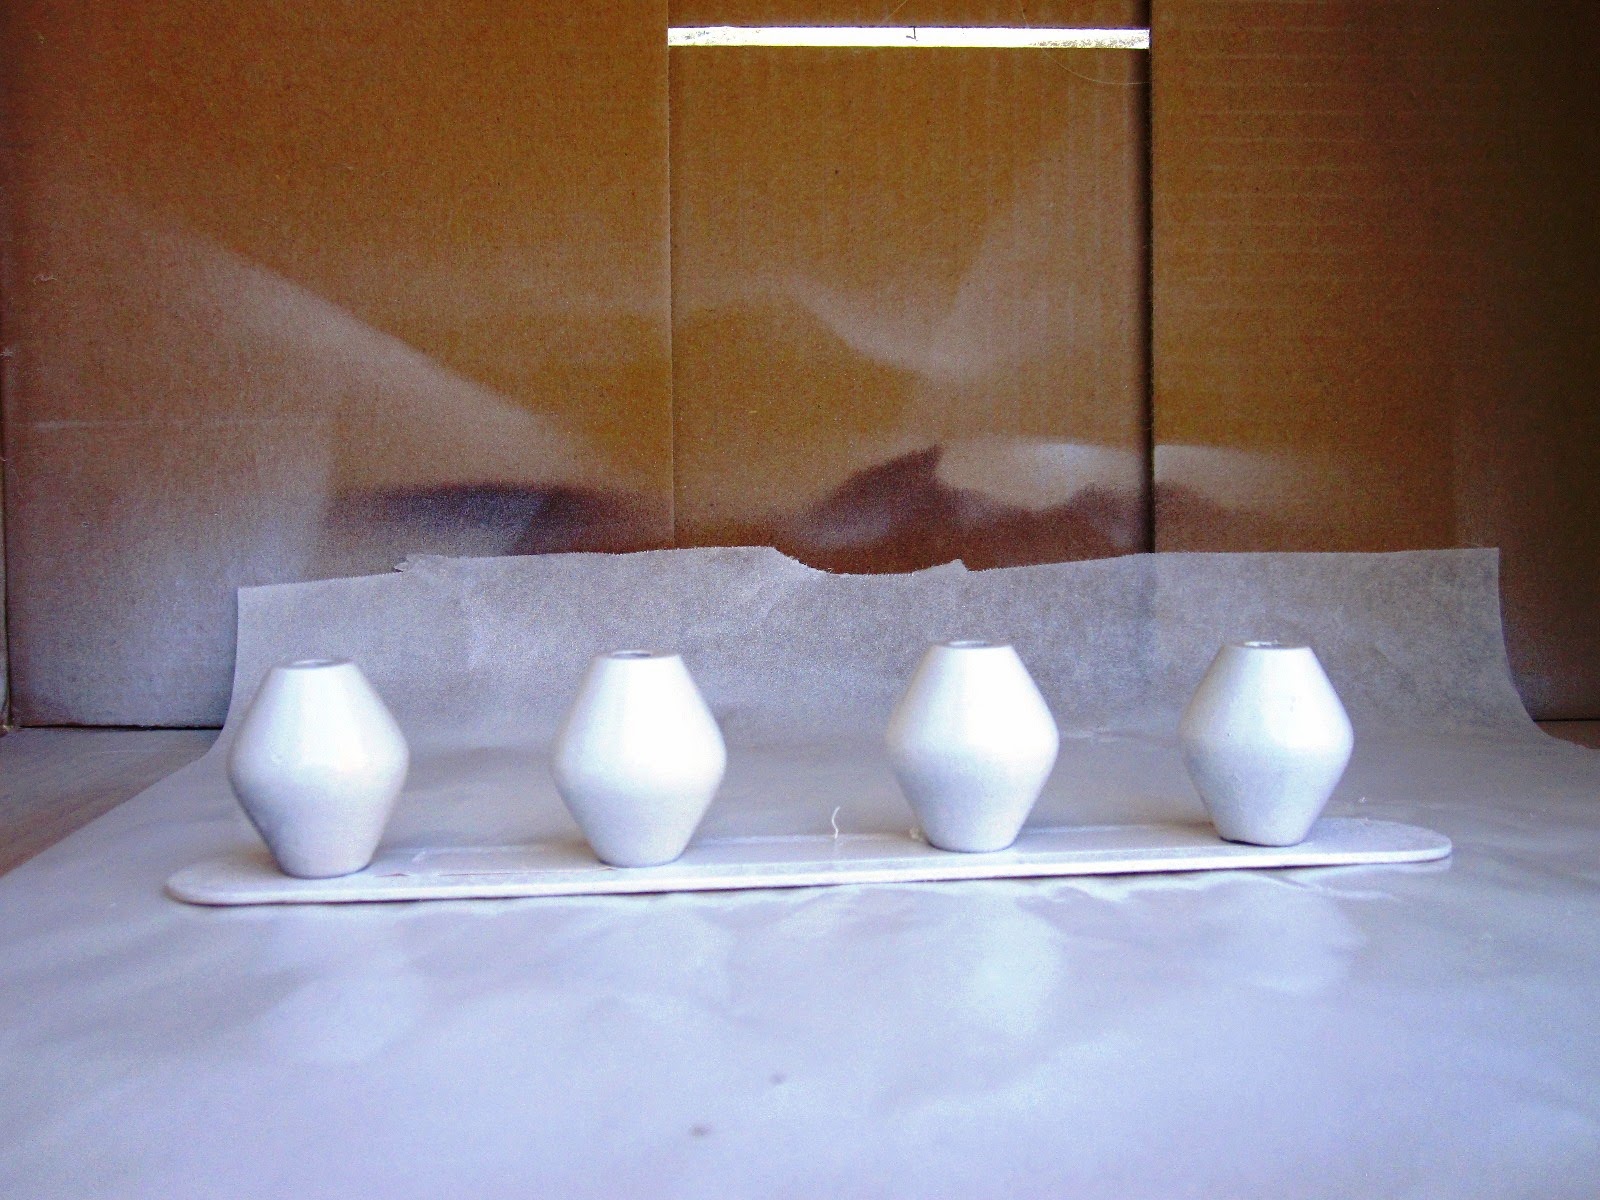 Four geometric wooden beads lined in a cardboard box, having just been spray painted white.